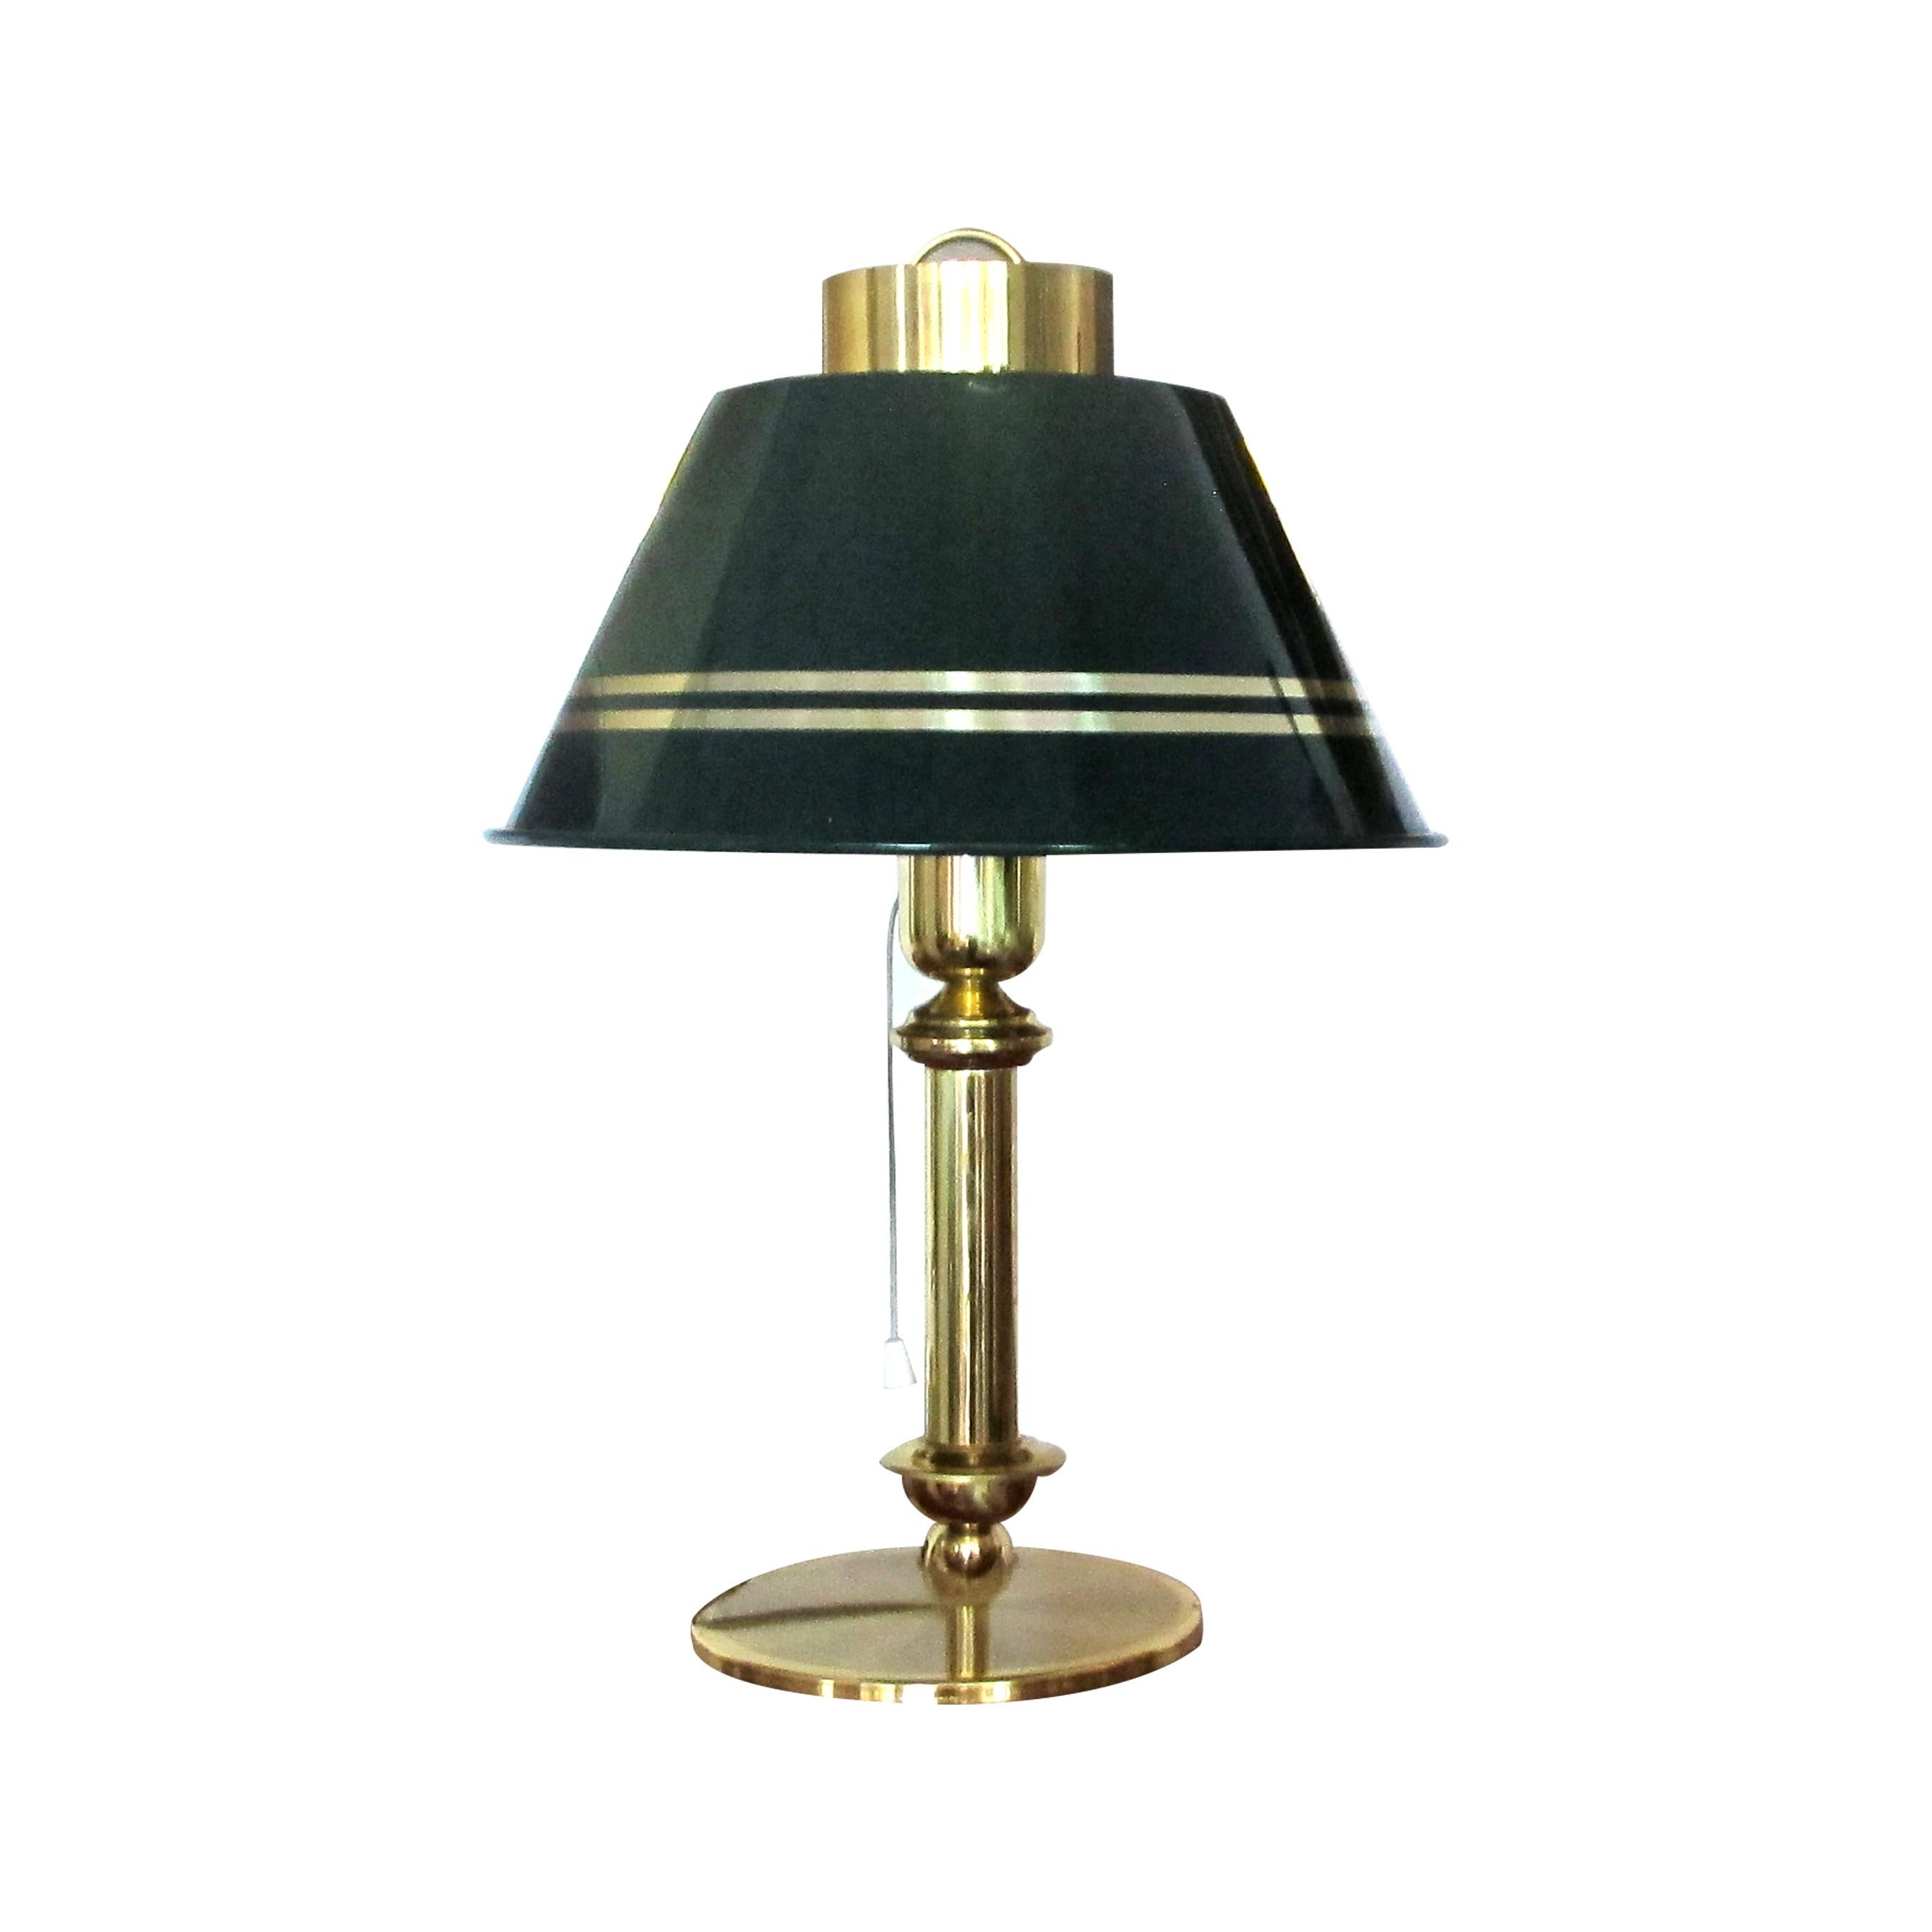 Single elegant 1970s bracket desk lamp with green metal shade. The lamp has its own custom-made green metal shade. The on-and-on switch is operated with a pull string. The lamp is in good condition with some signs of wear commensurate with age. The